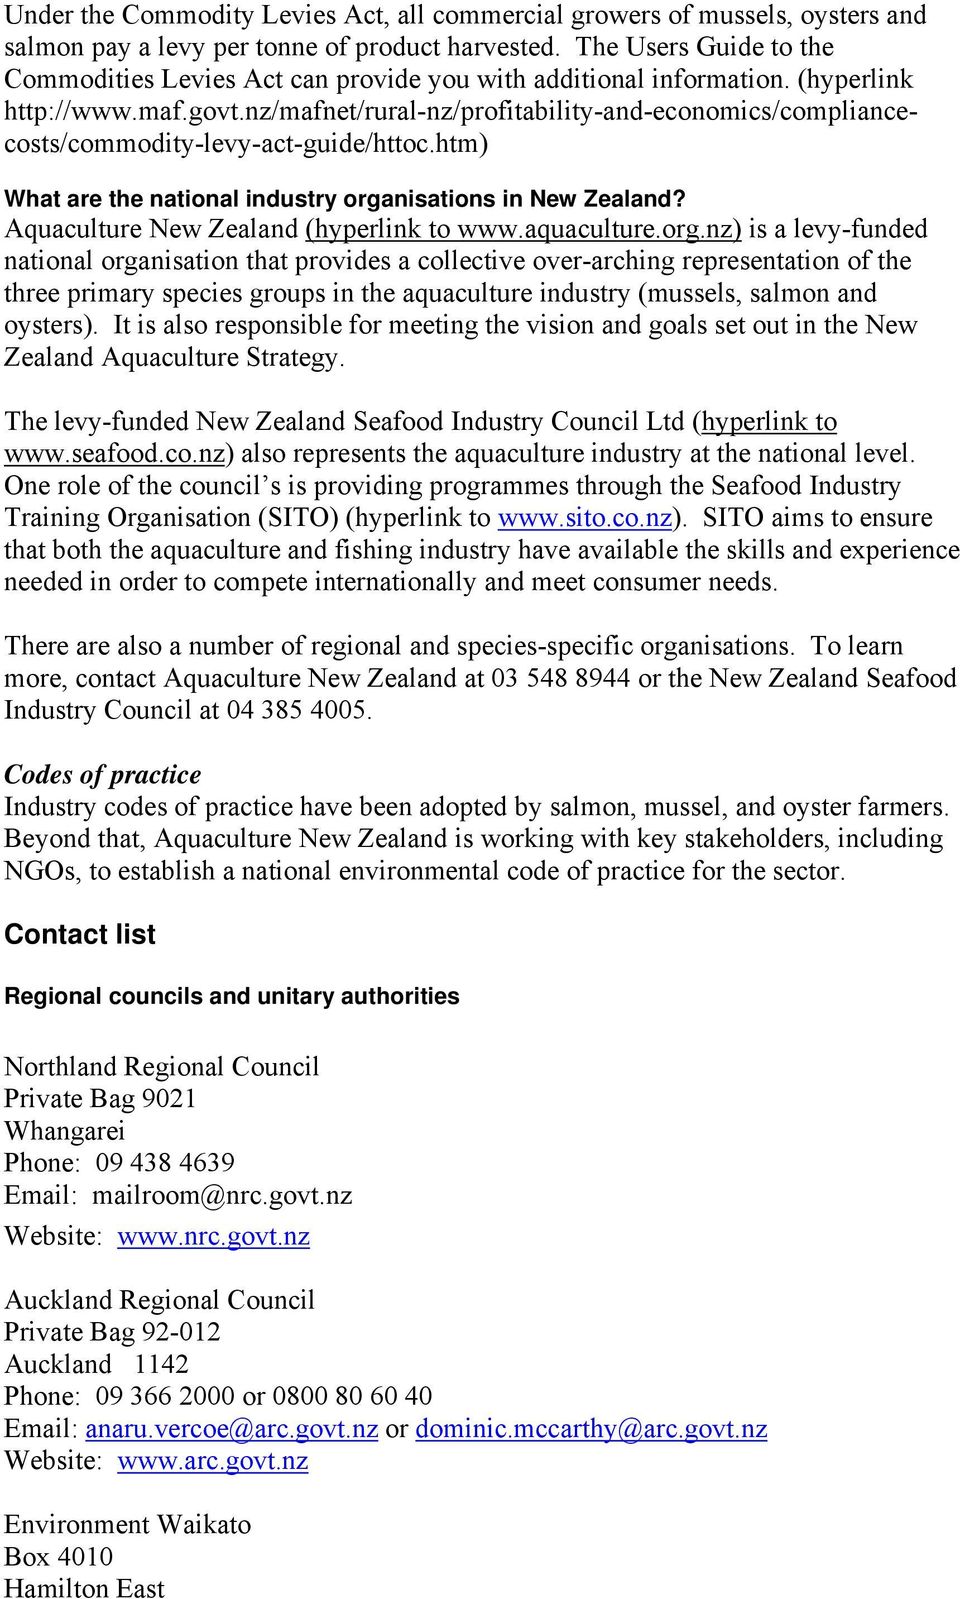 nz/mafnet/rural-nz/profitability-and-economics/compliancecosts/commodity-levy-act-guide/httoc.htm) What are the national industry organisations in New Zealand?